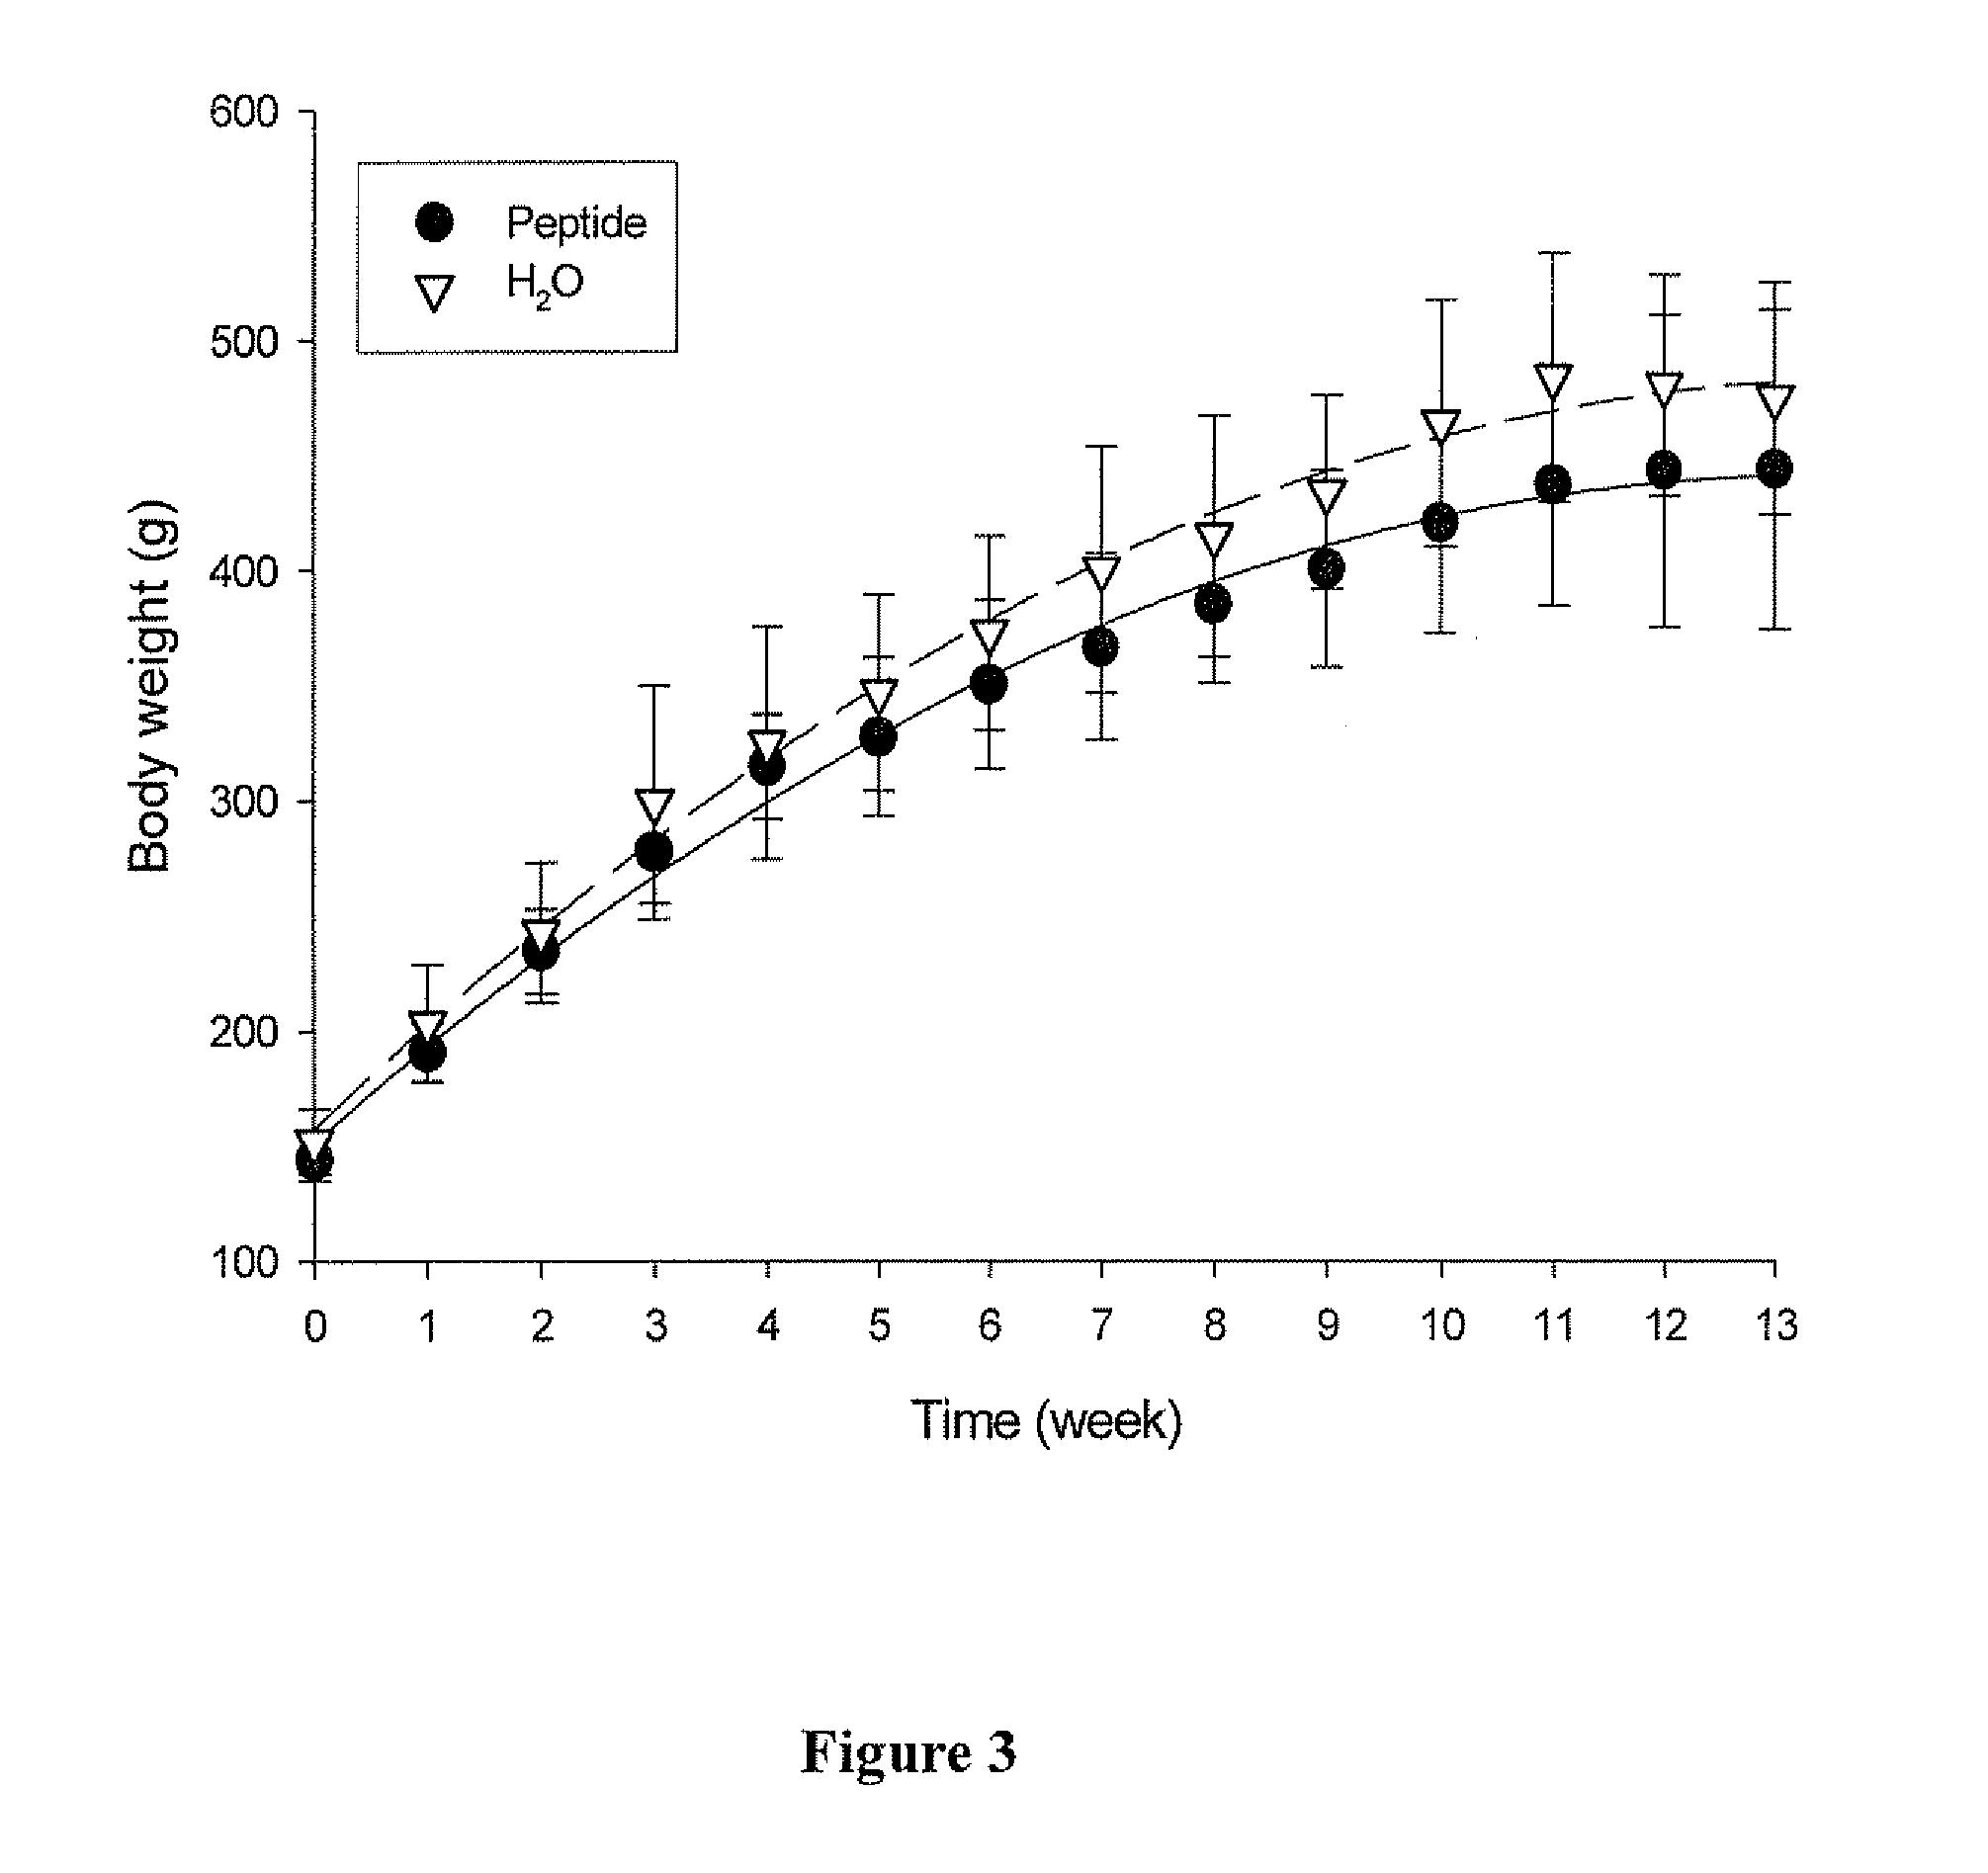 Process For Preparing Peptide Products For Promoting Cholecystokinin Secretion And Use Of The Peptide Products